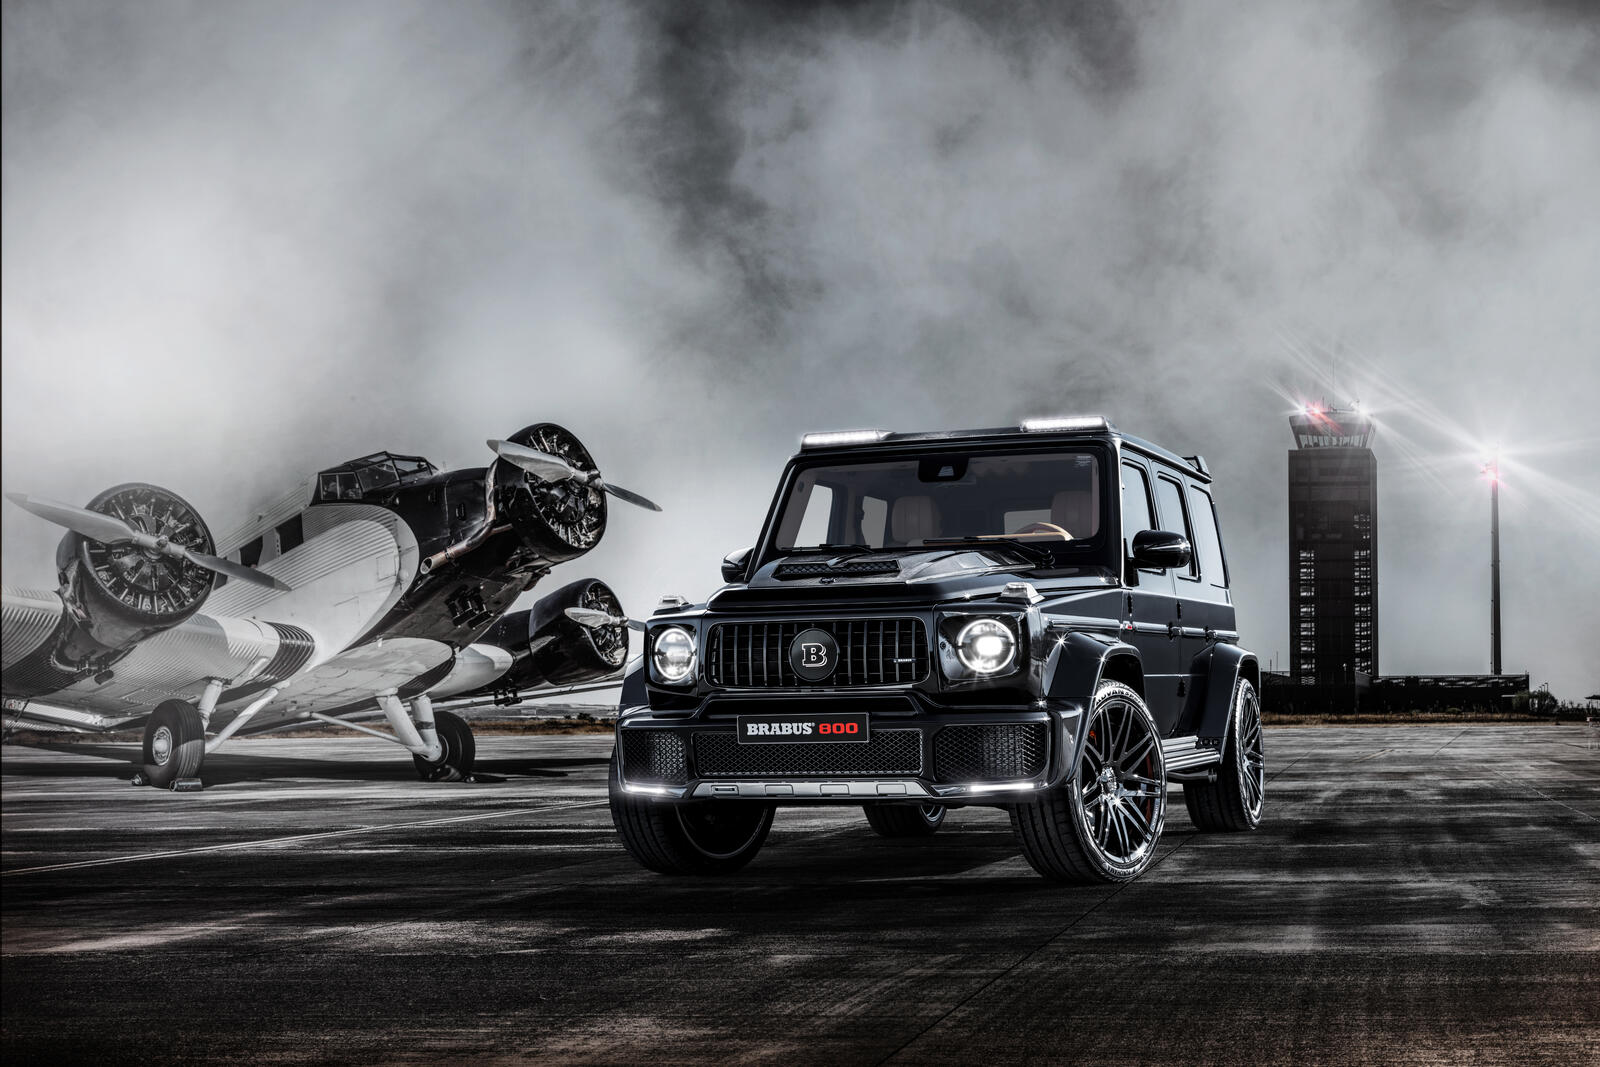 Free photo Mercedes Benz g class and an airplane in a monochrome photo